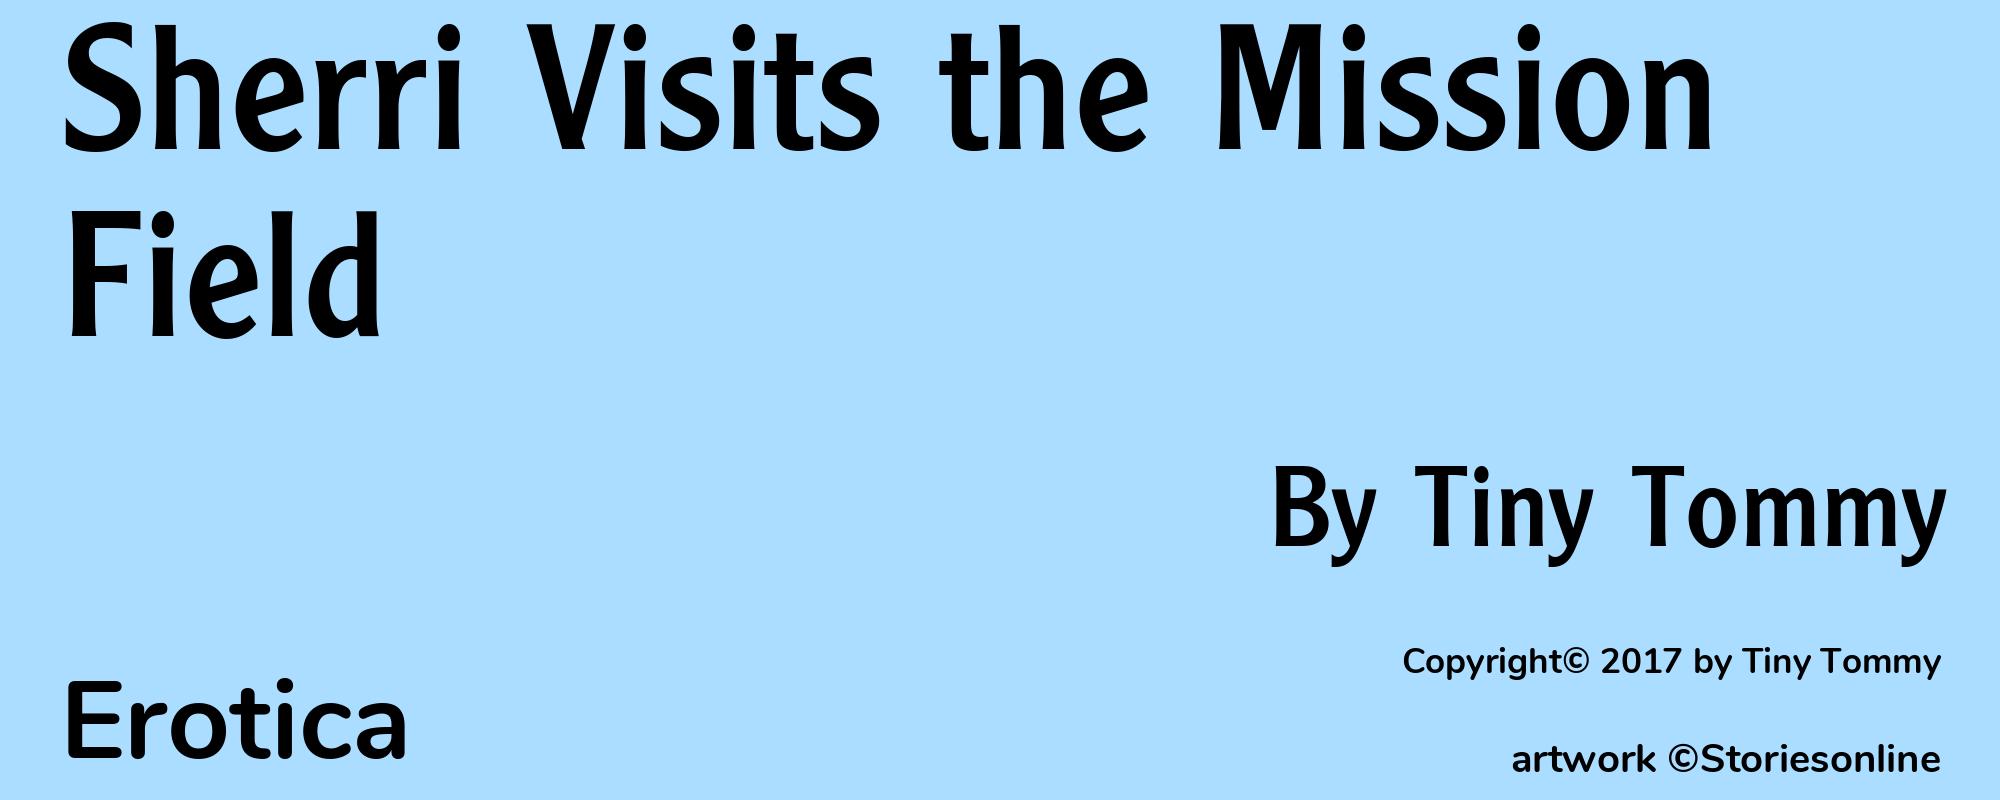 Sherri Visits the Mission Field - Cover